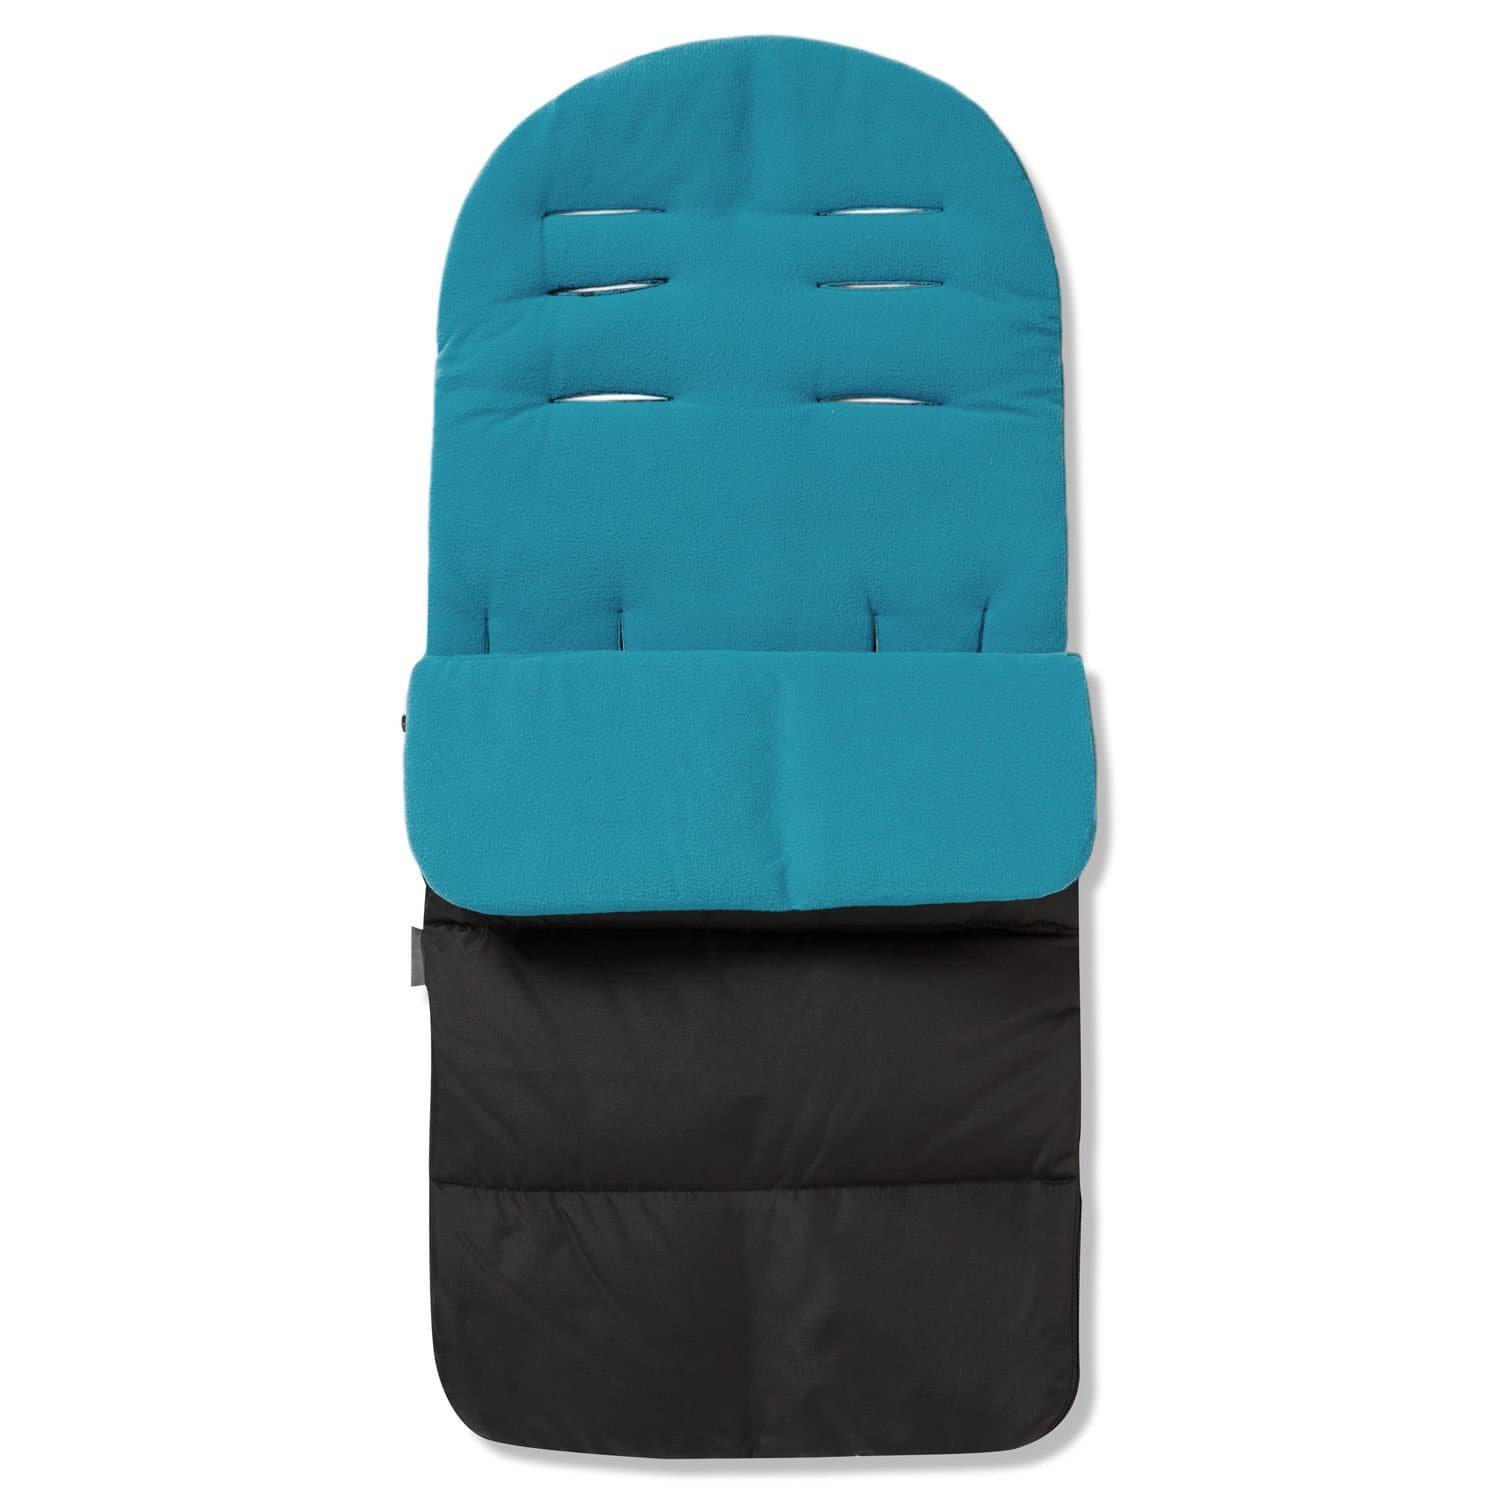 Premium Footmuff / Cosy Toes Compatible with Baby Jogger - Ocean Blue / Fits All Models | For Your Little One